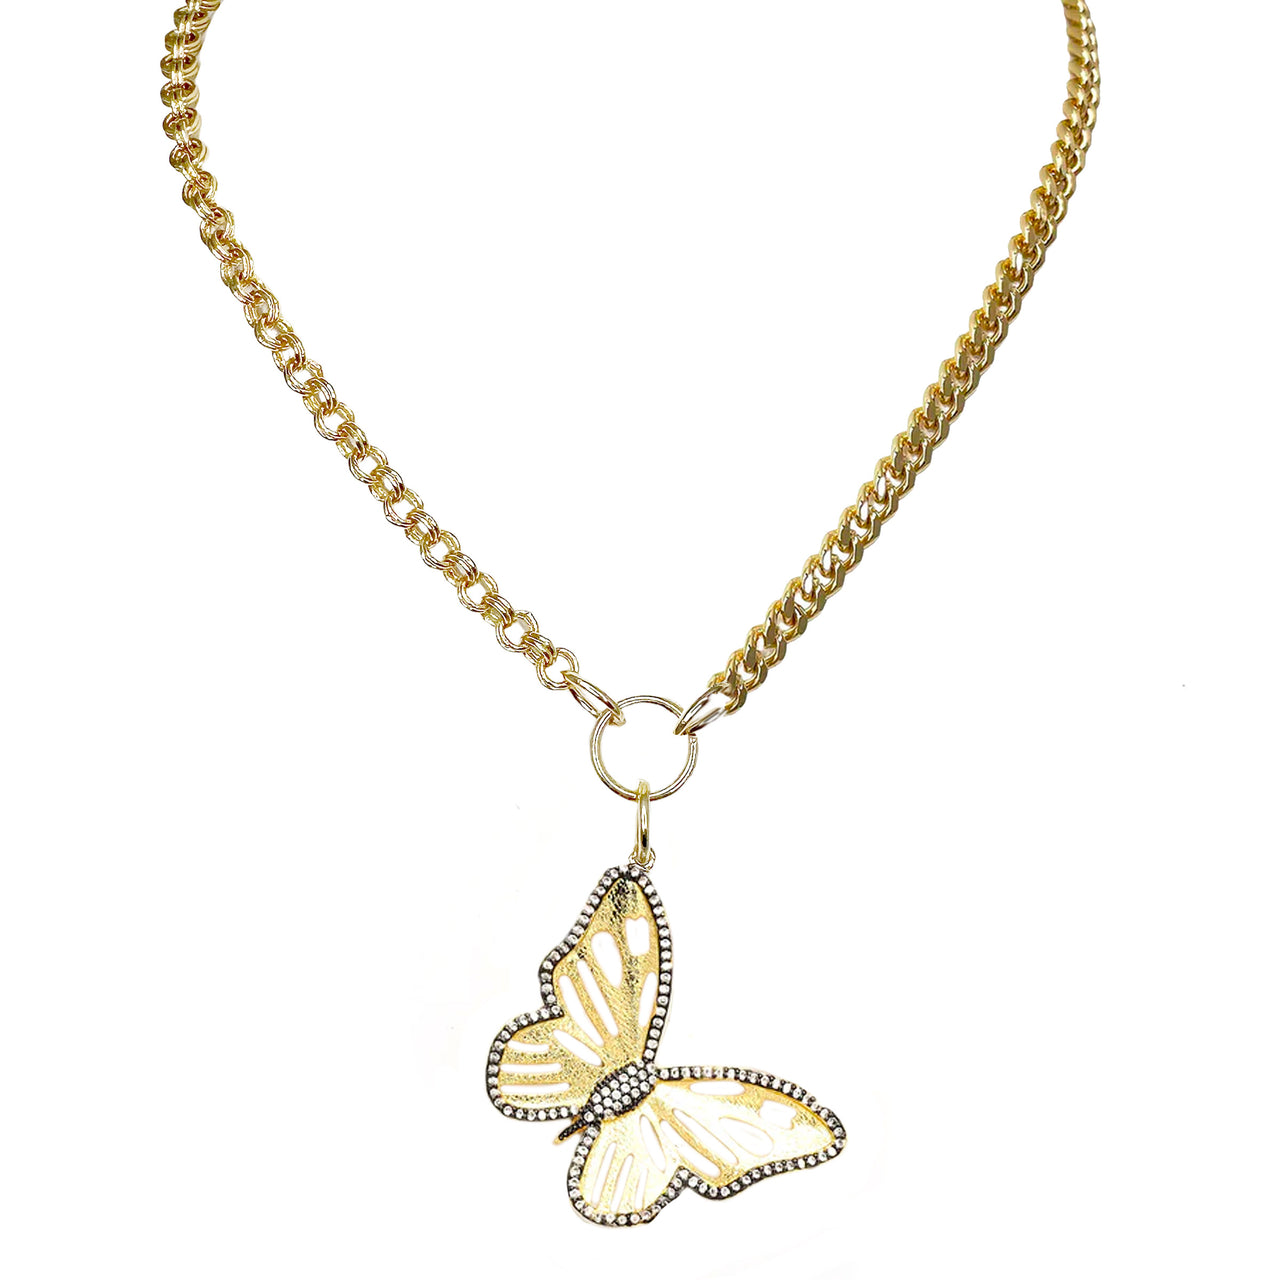 Barbara Butterfly Necklace